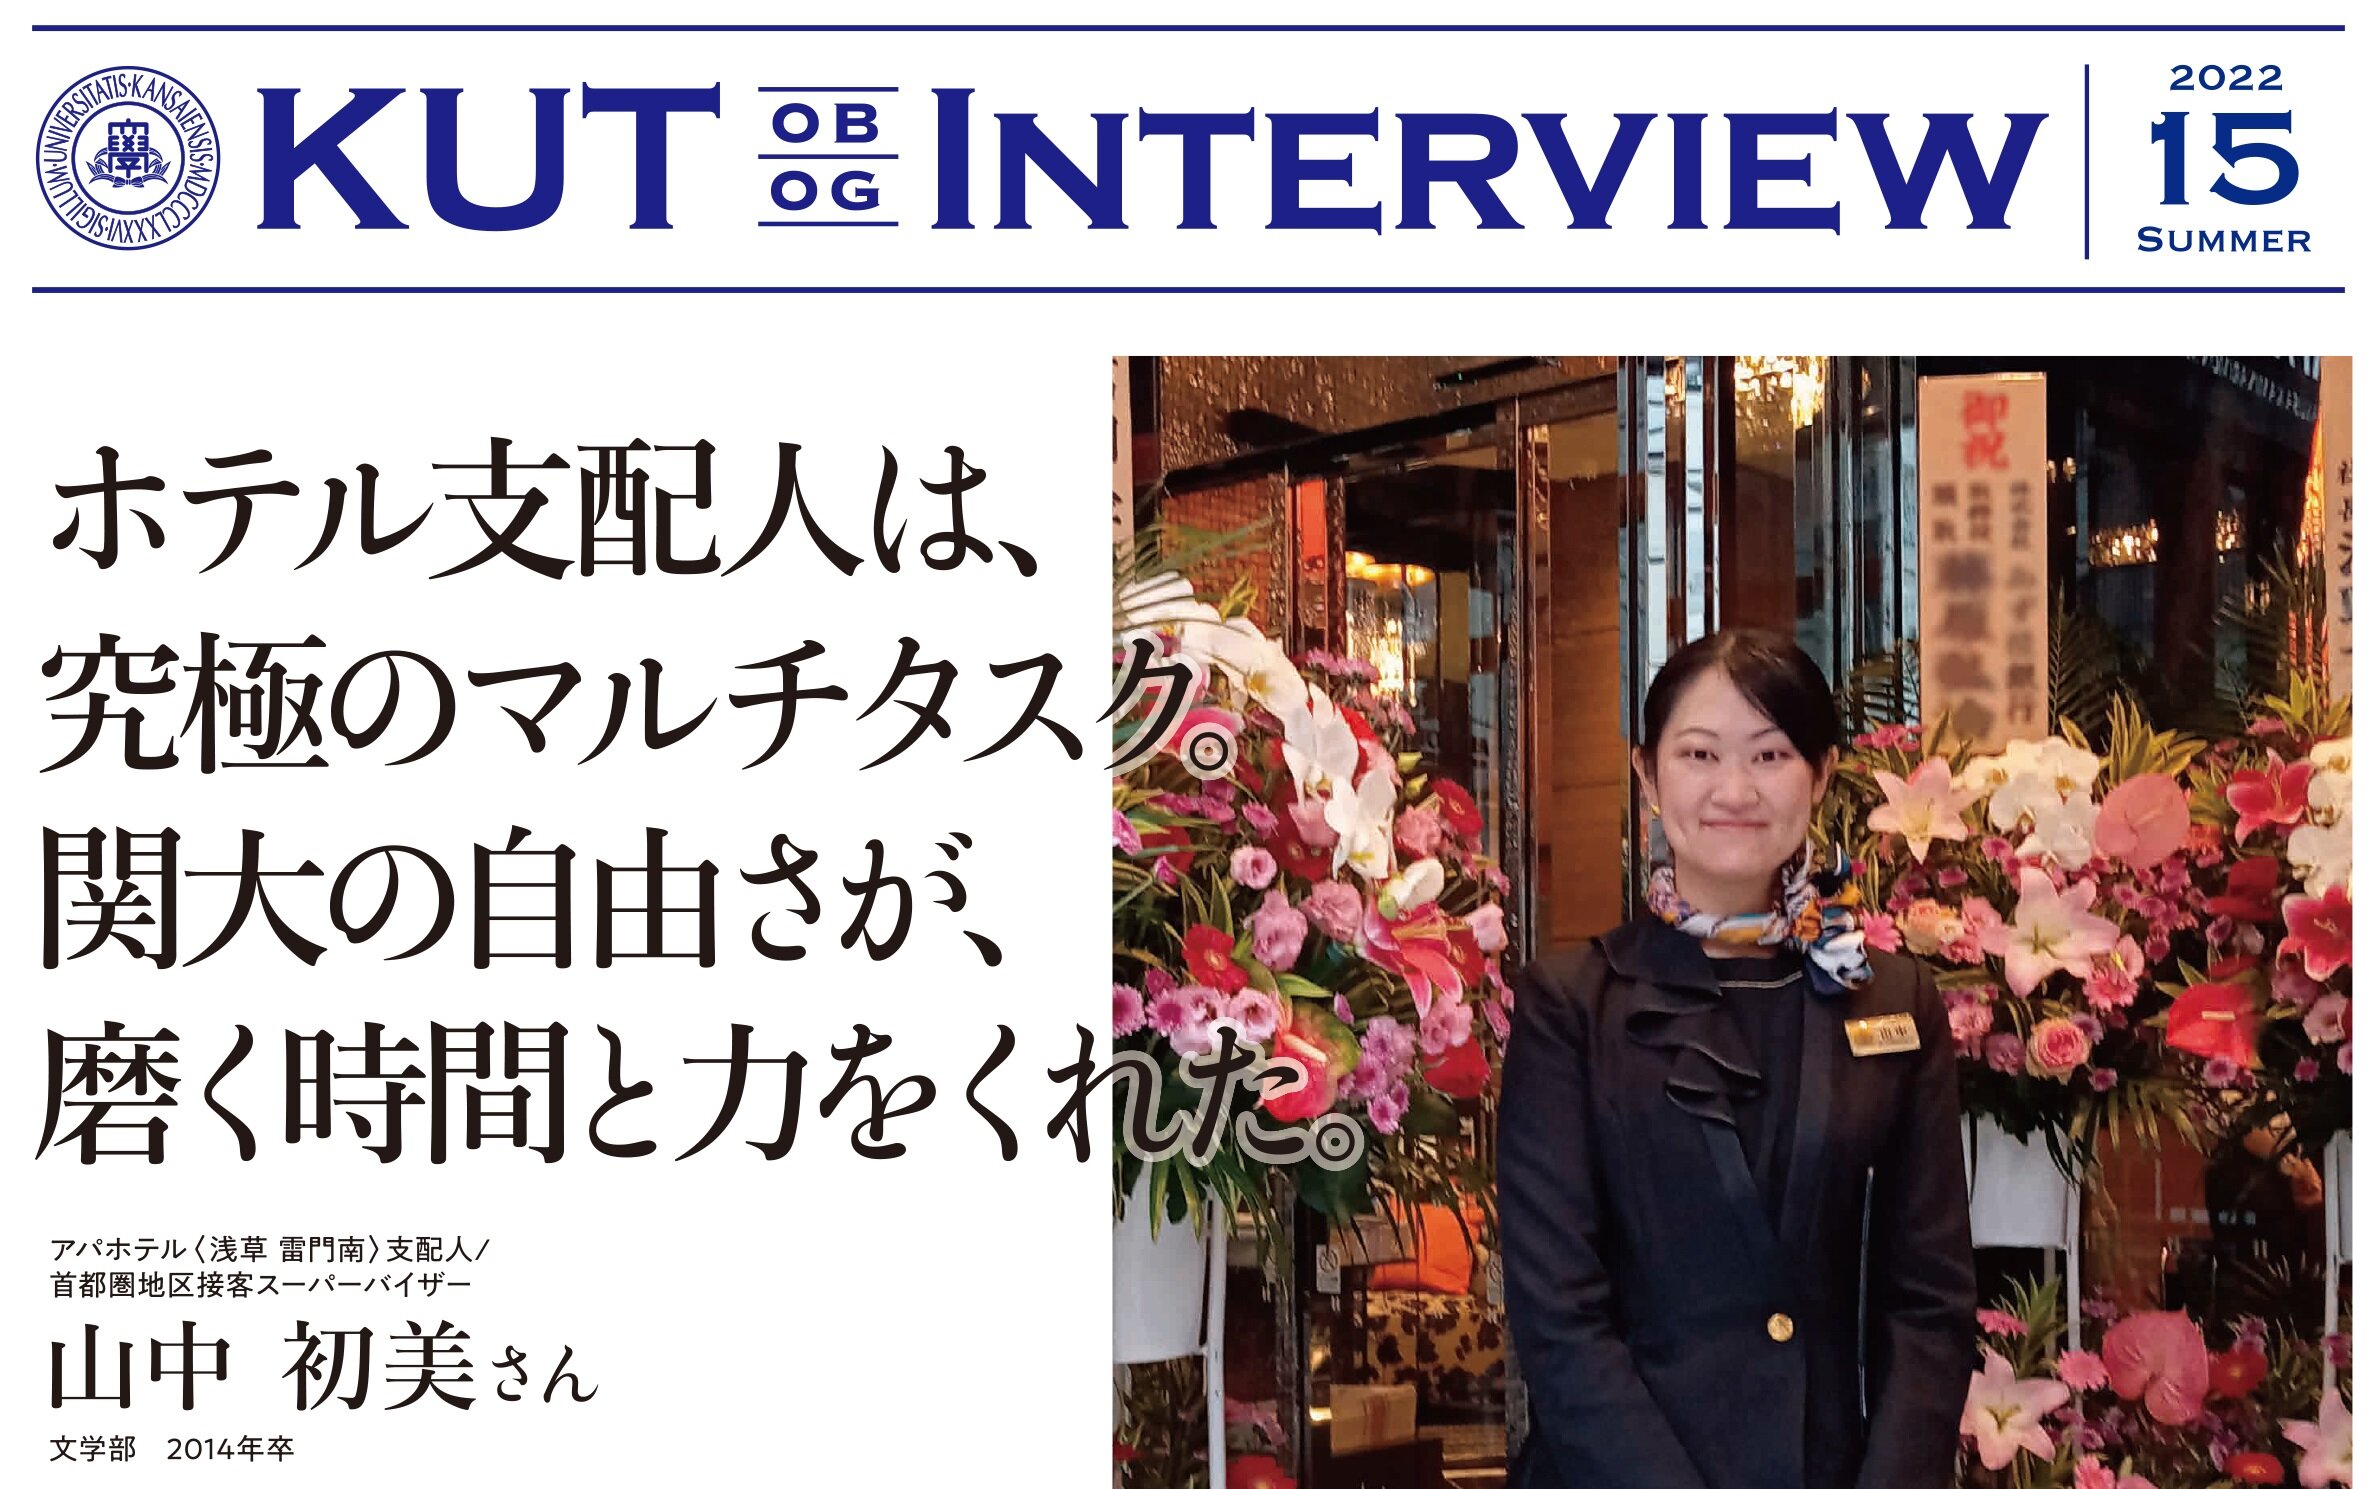 〈KUT INTERVIEW 第１５号〉首都圏で活躍する卒業生をご紹介します！